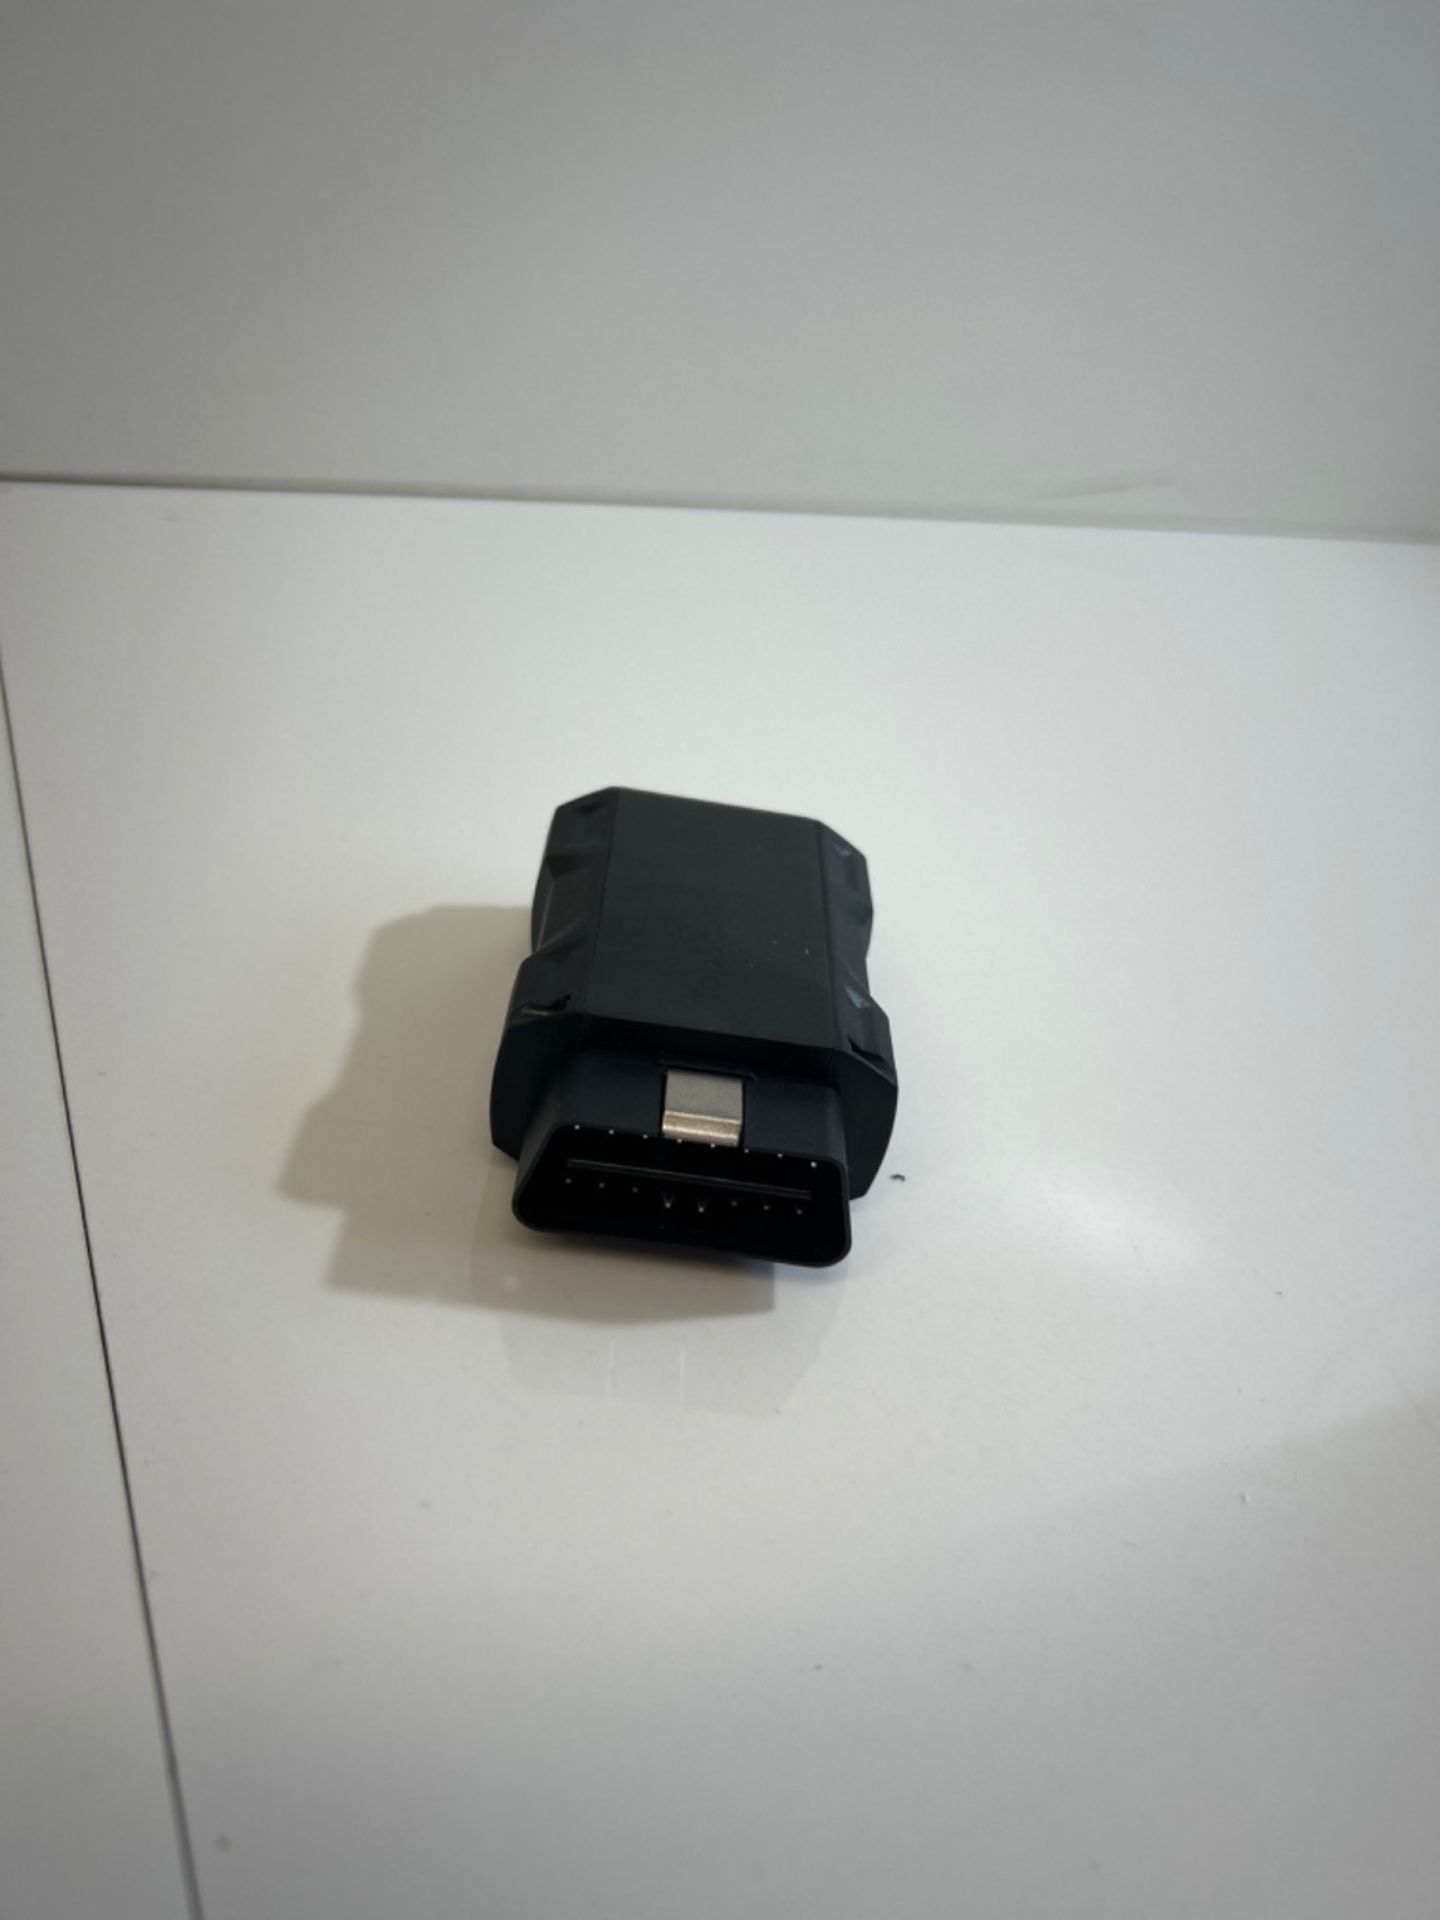 TOPDON Topscan OBD2 Scanner Bluetooth, Wireless OBD2 Code Reader with Active Test, 8 Reset, Car Dia - Image 2 of 3